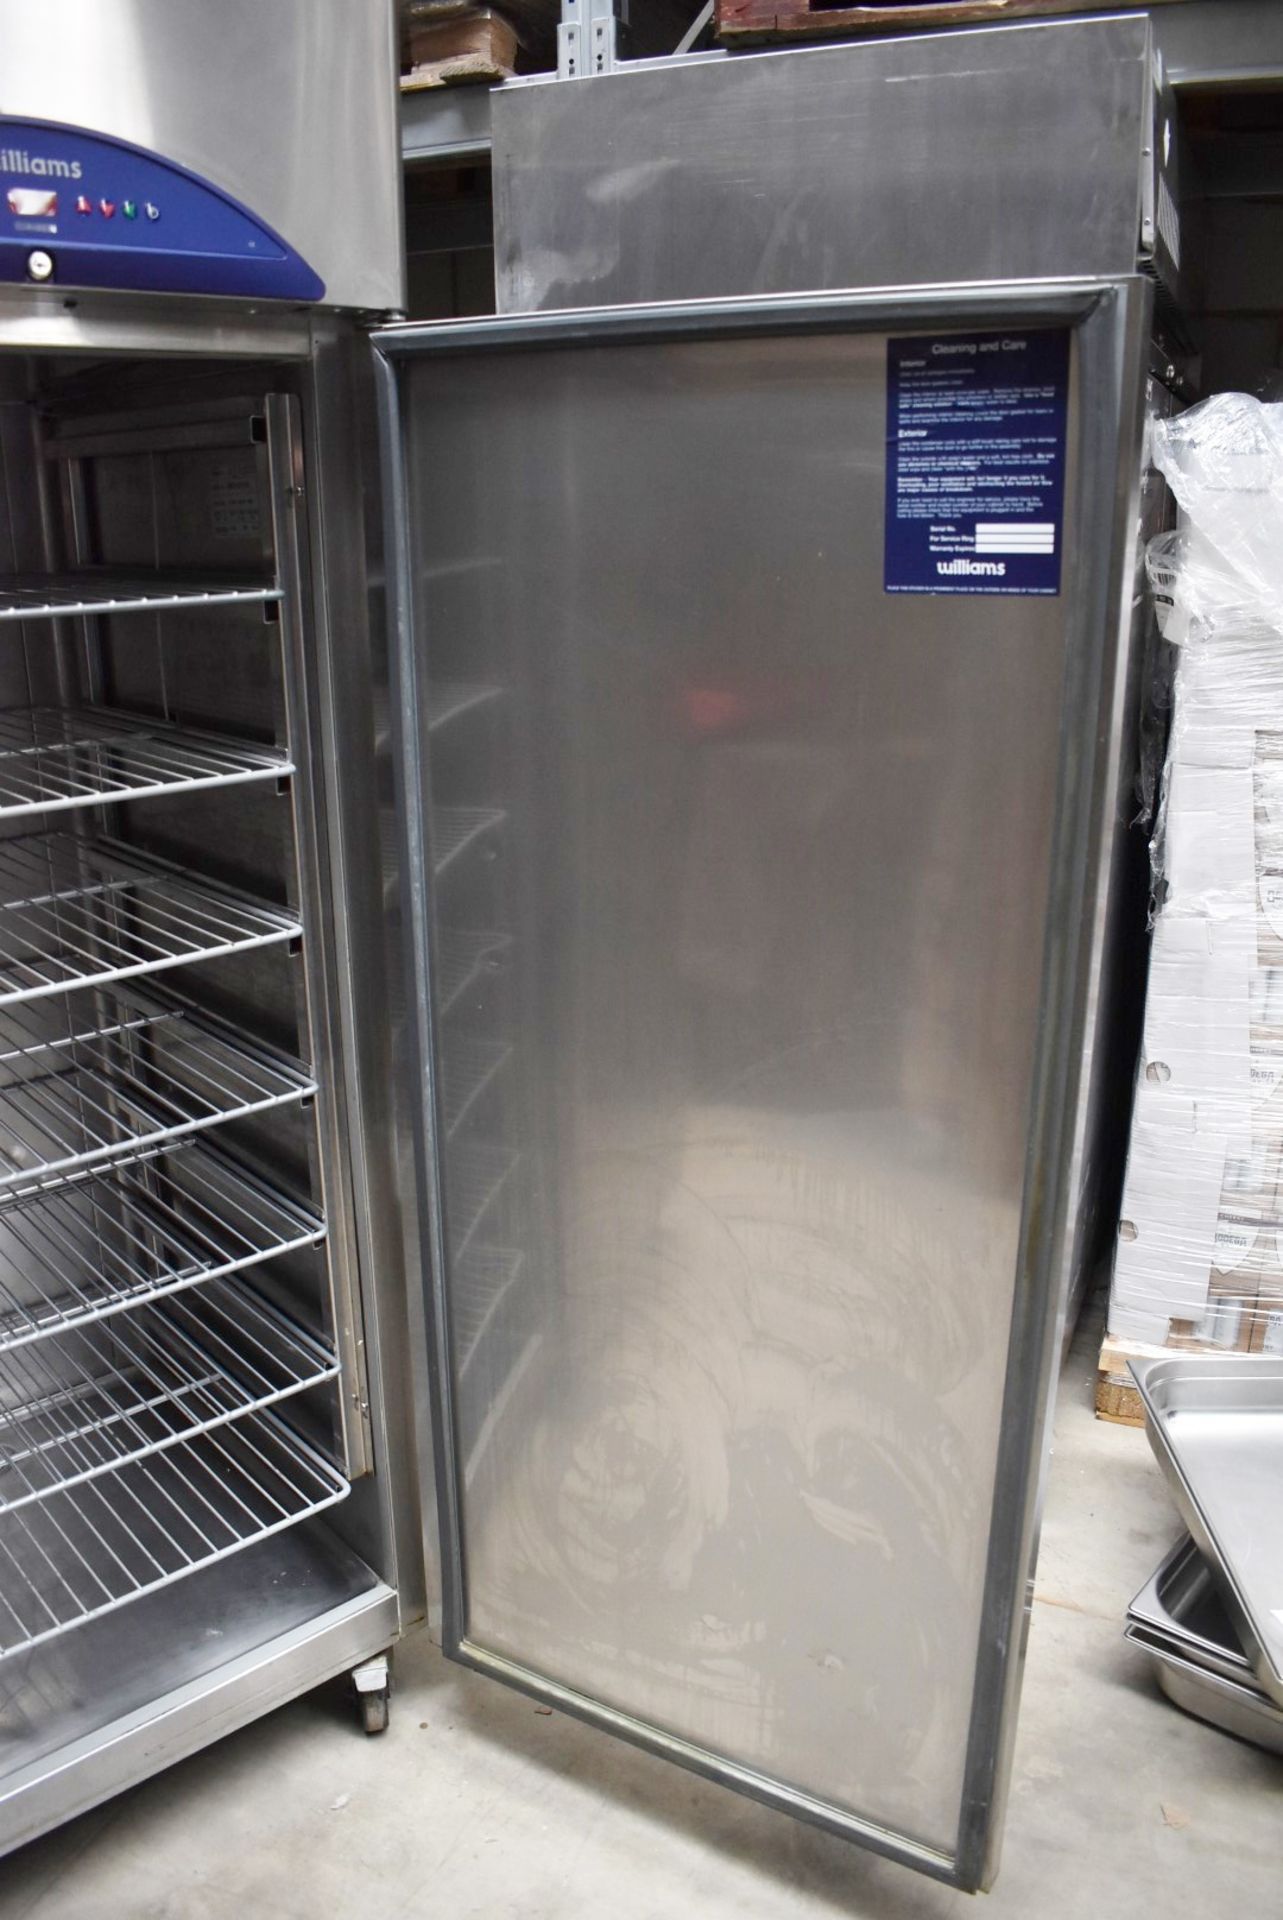 1 x Williams Double Door Upright Side by Side Refrigerator With Gastro Food Trays and Storage - Image 3 of 18